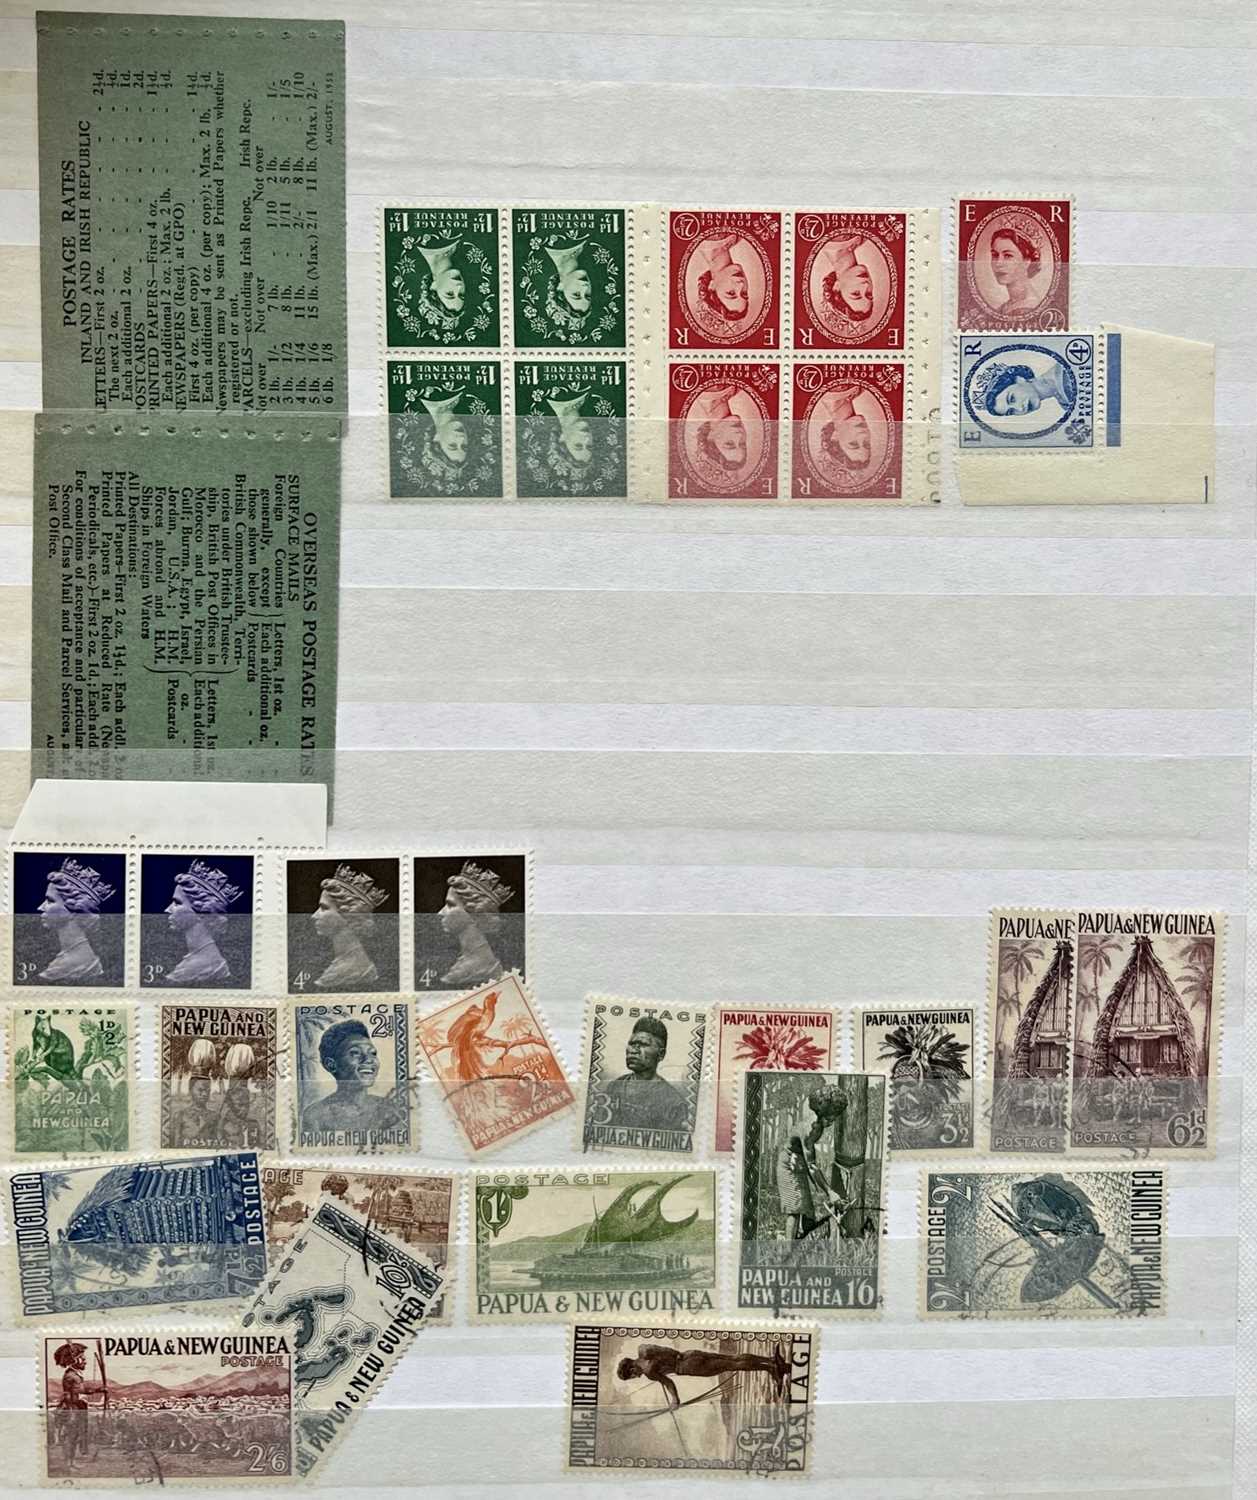 COMMONWEALTH & GREAT BRITAIN - George VI - QE2 mint and used, some full sets plus blocks, some - Image 5 of 12